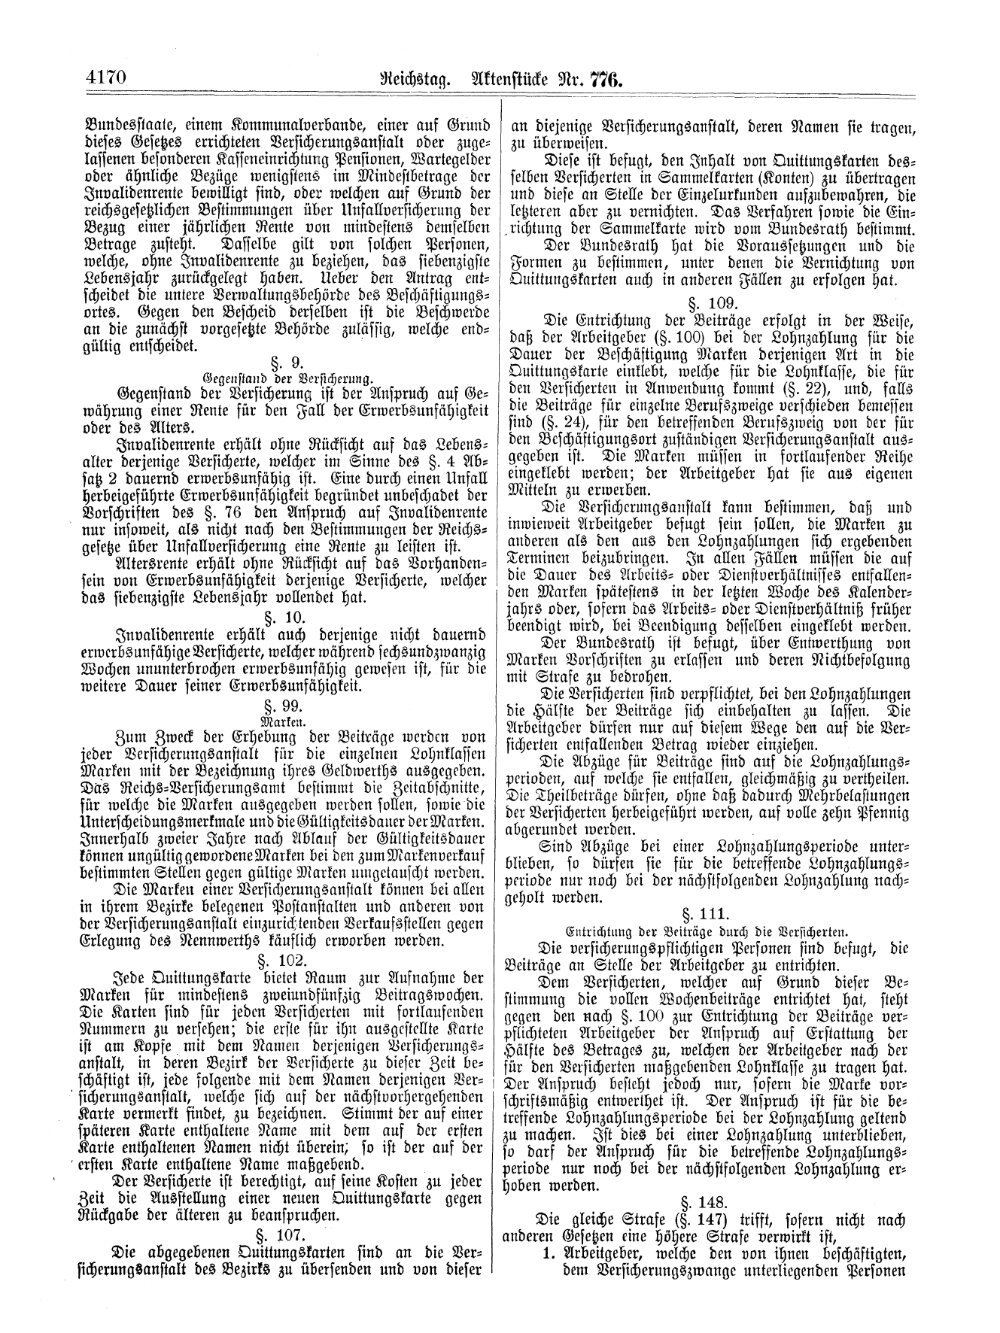 Scan of page 4170